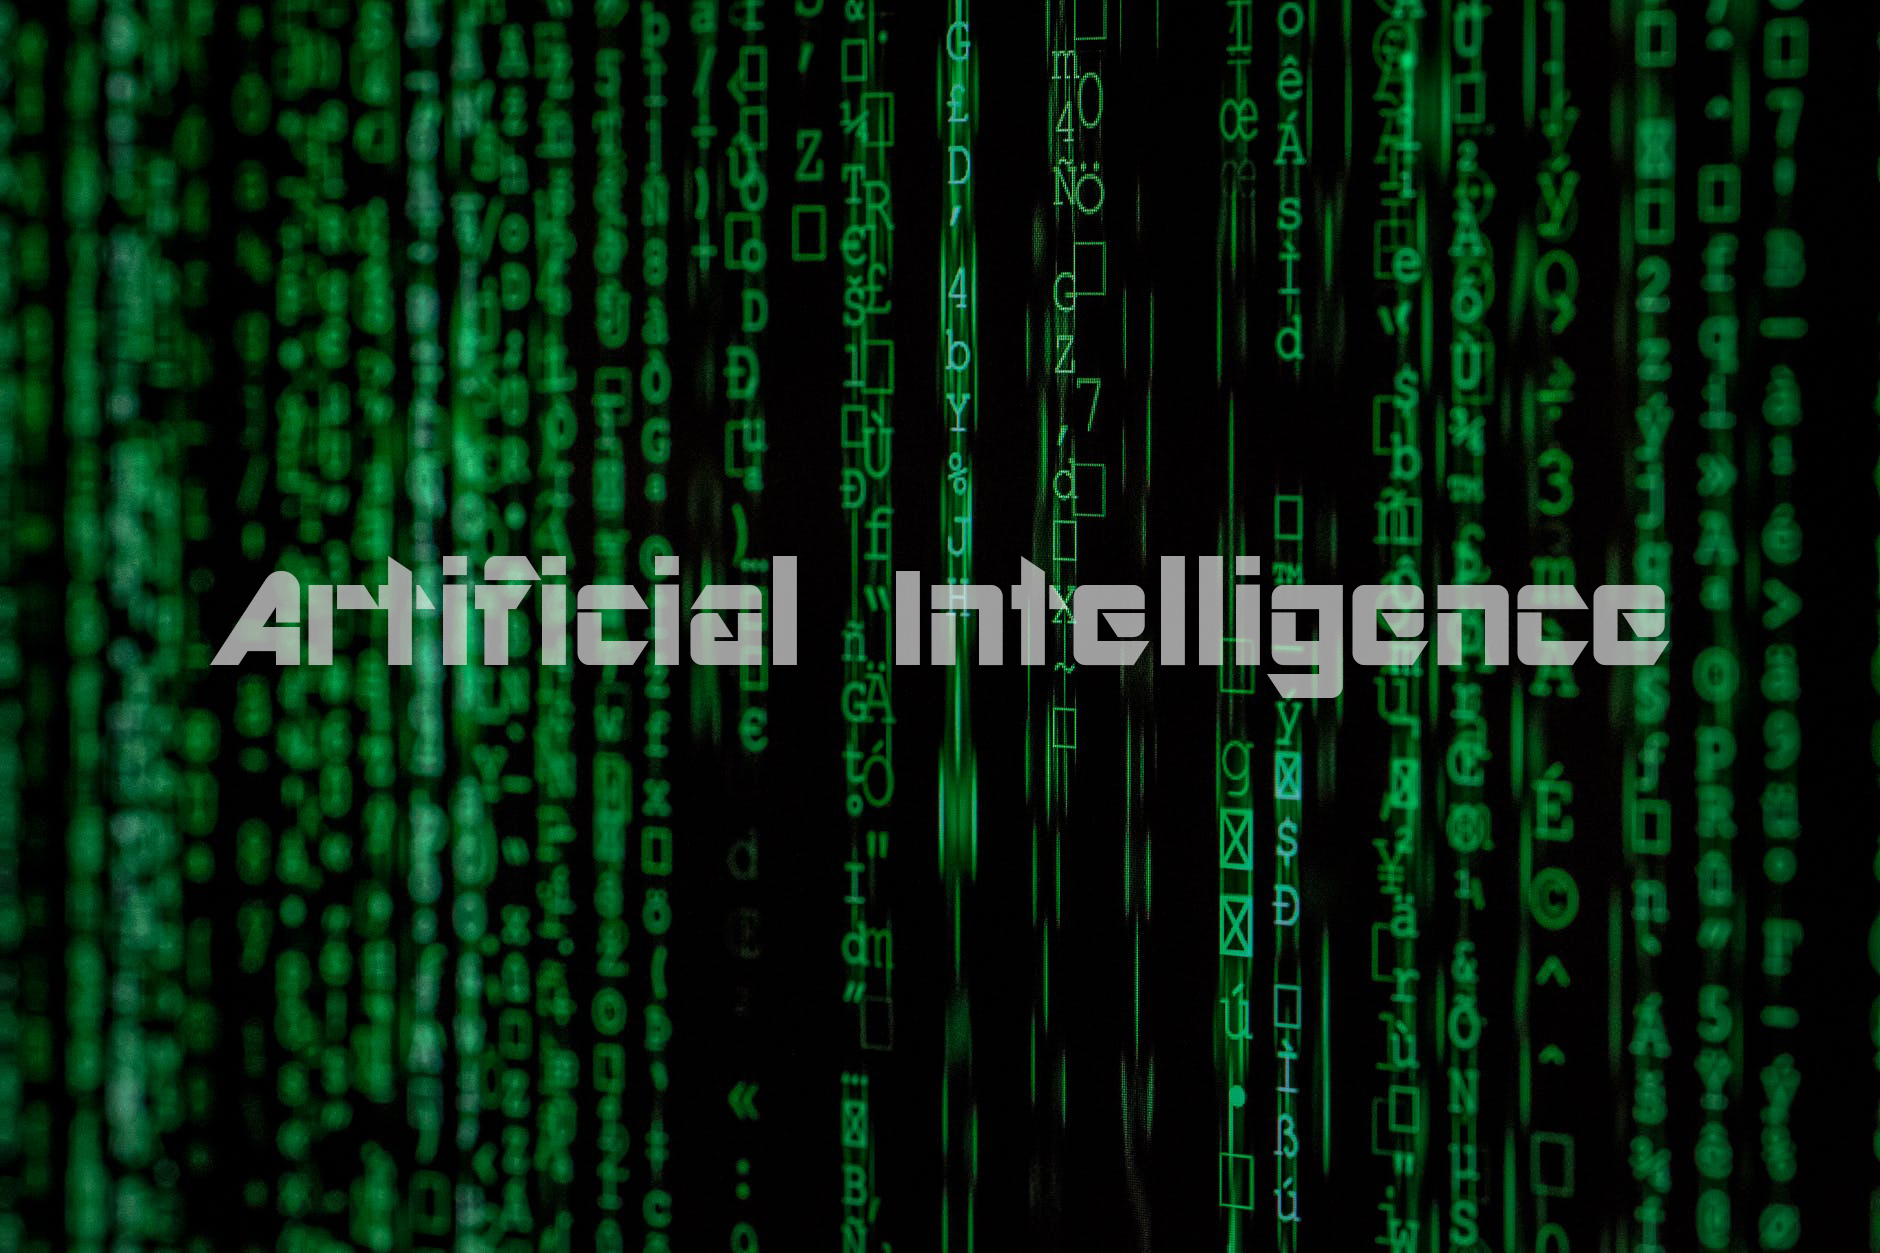 An image showing a text Artificial intelligence with Cryptic text in the background.